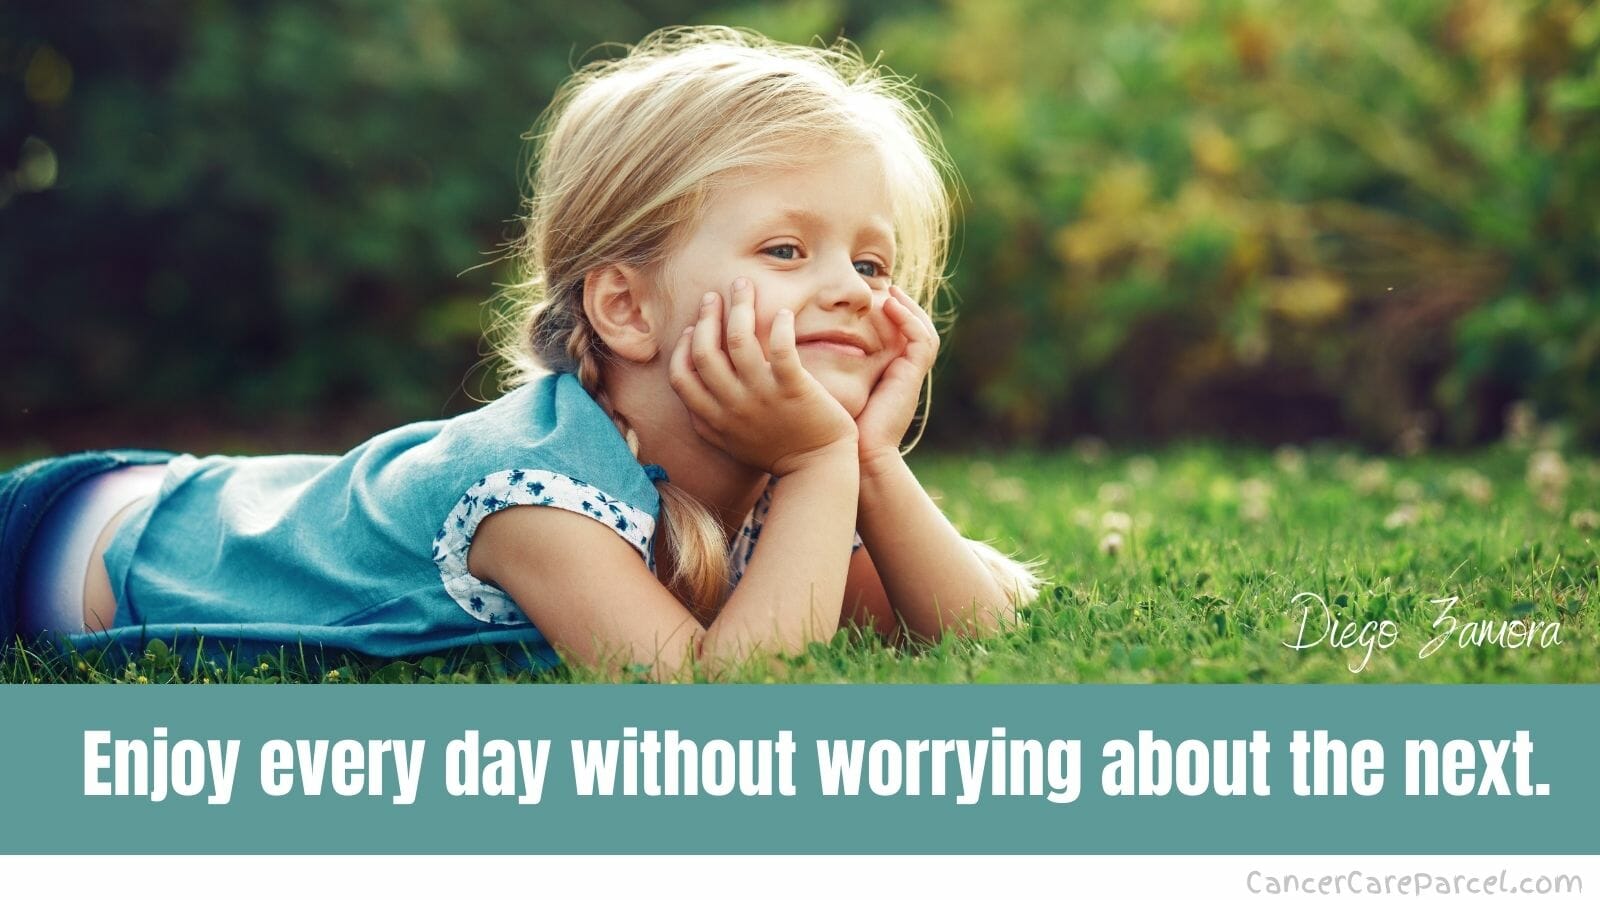 Enjoy every day without worrying about the next.